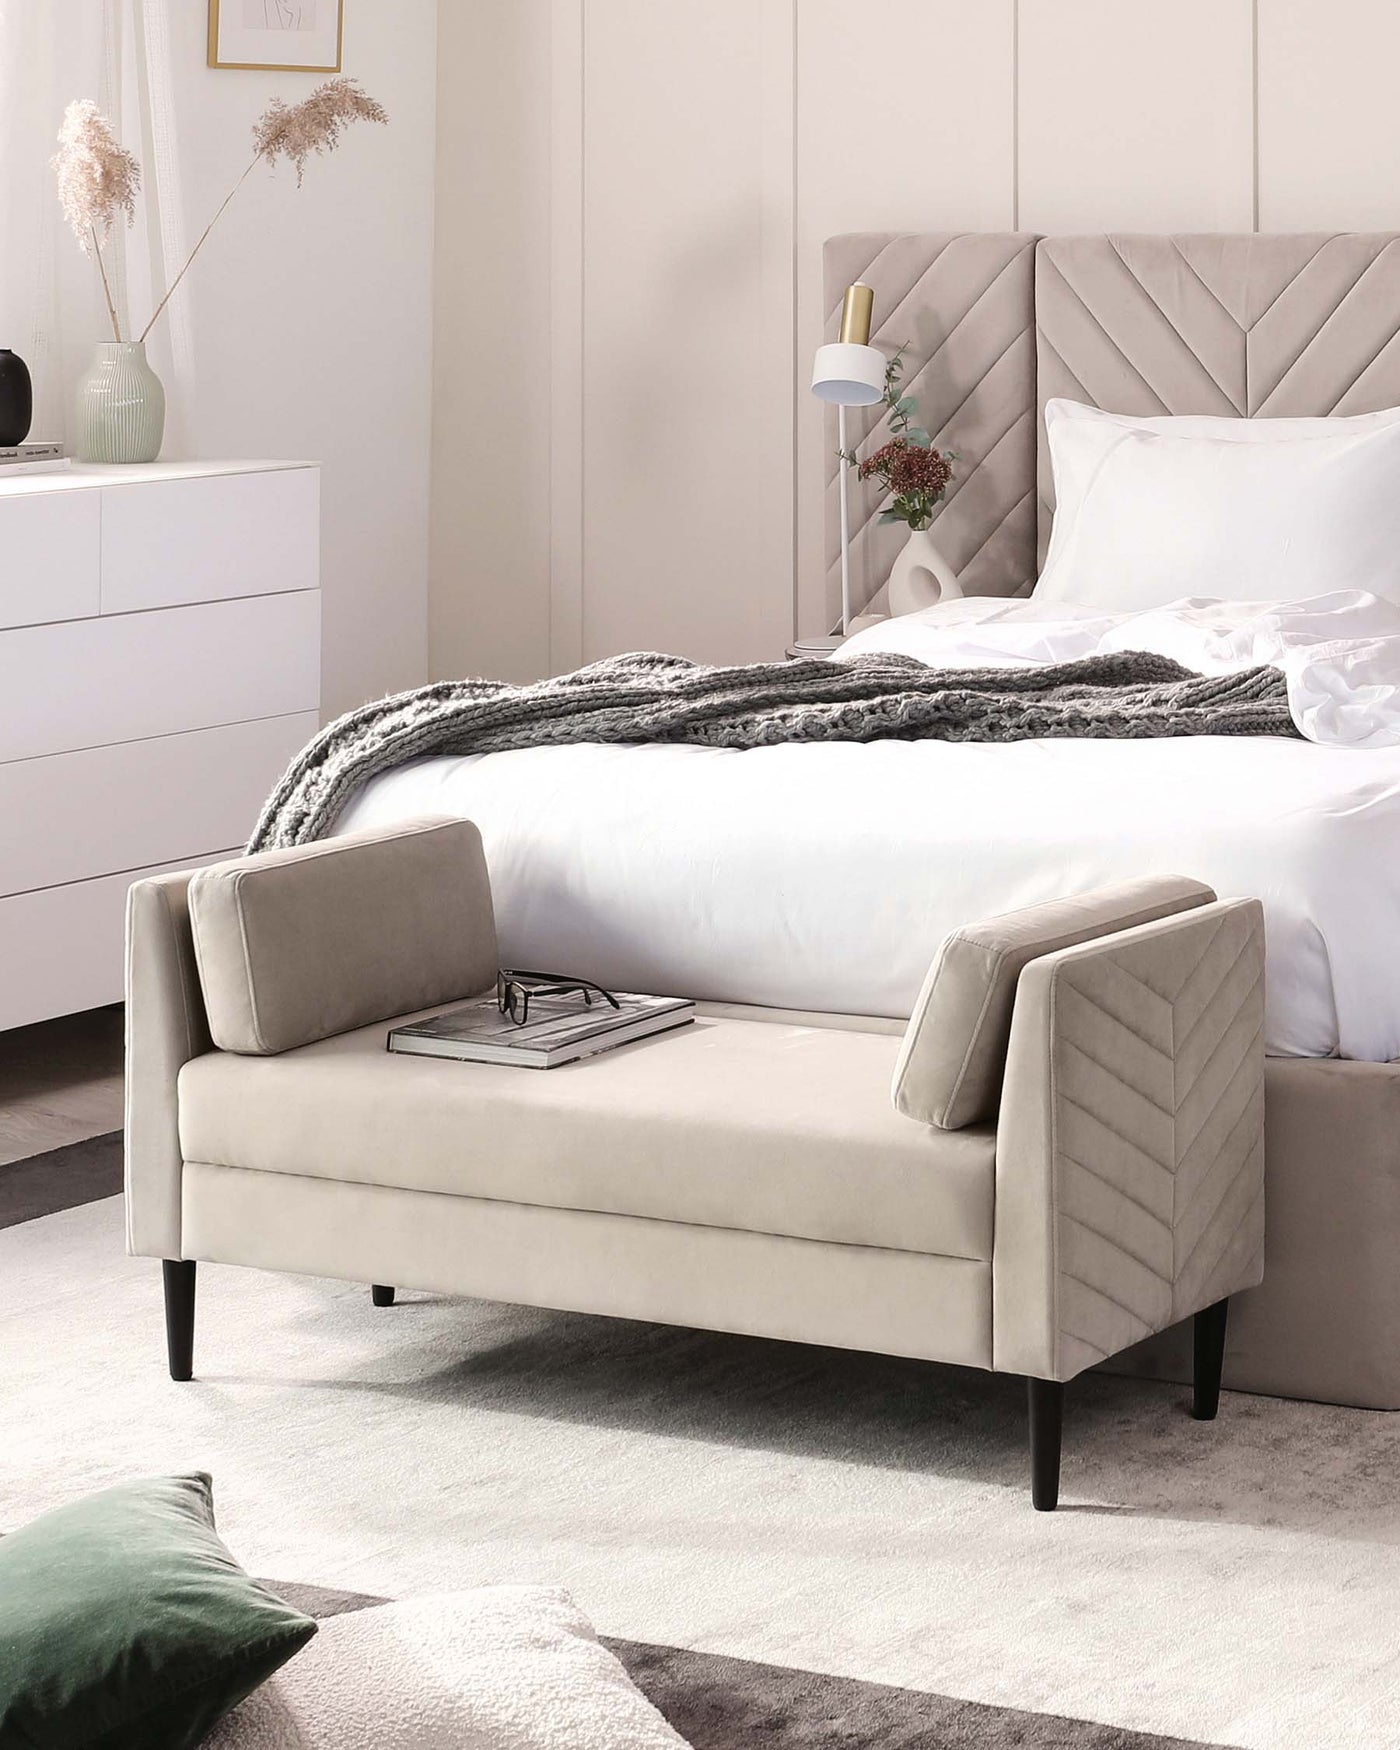 Elegant contemporary bedroom furniture set featuring a plush light grey upholstered bed with a diamond-patterned tufted headboard, flanked by a sleek white bedside dresser with minimalist handles. In the foreground, there is a matching light grey upholstered bench with clean lines and dark tapered legs, adorned with a simple decorative tray. The set is complemented by a soft-hued area rug, enhancing the room's modern and tranquil ambiance.